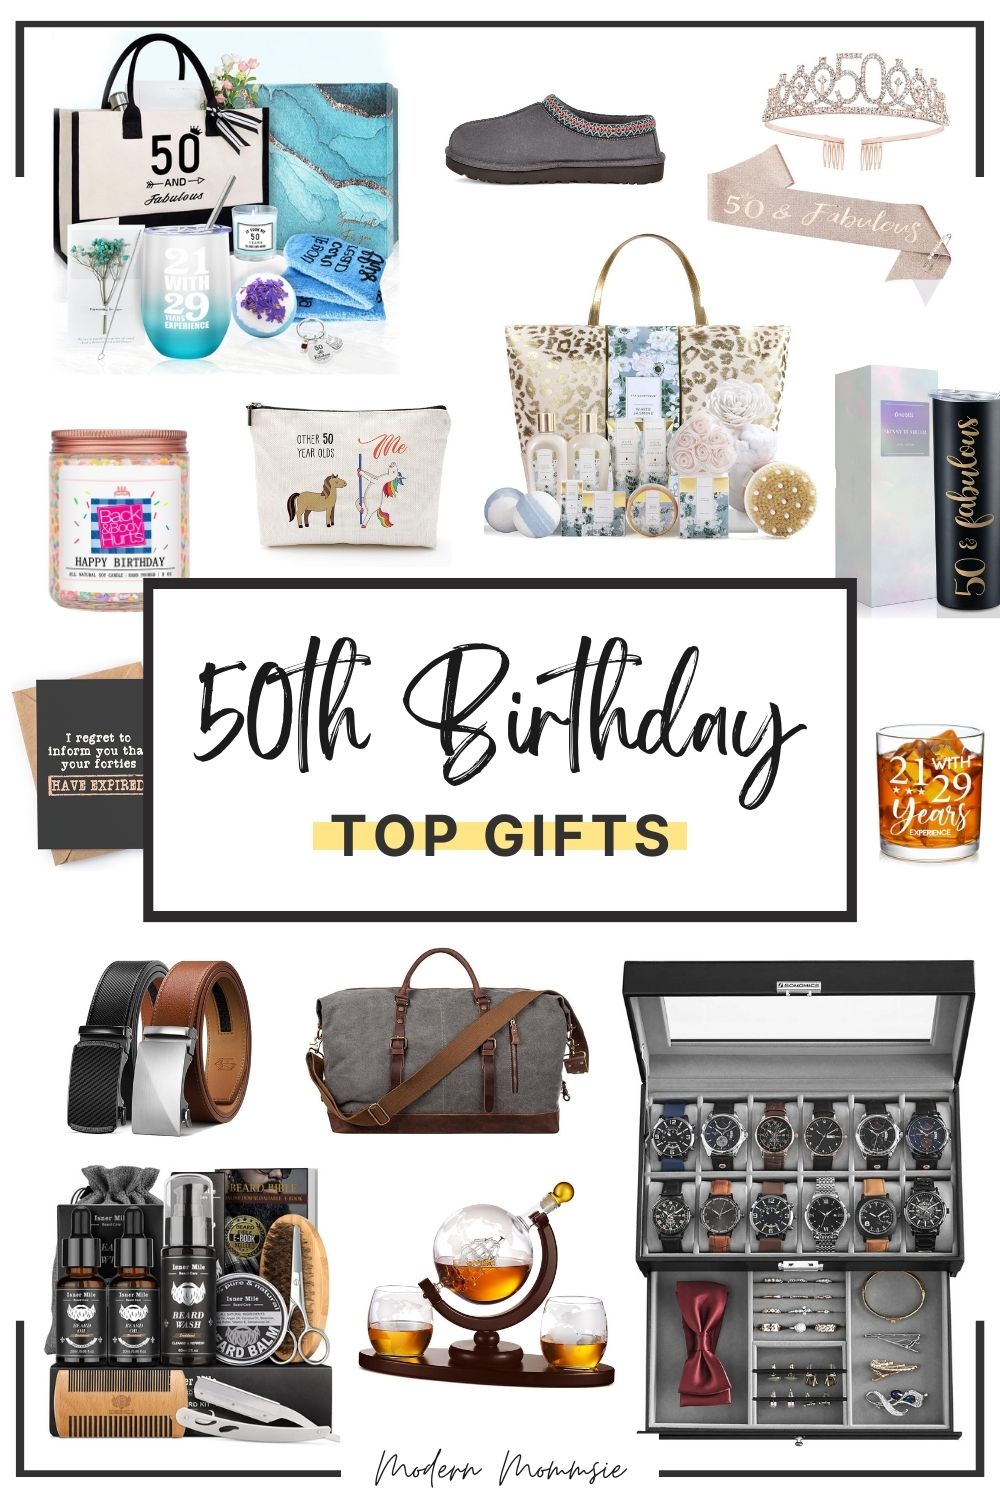 Small Shop Gifts for Men (Holiday Gift Guide) | Merrick's Art